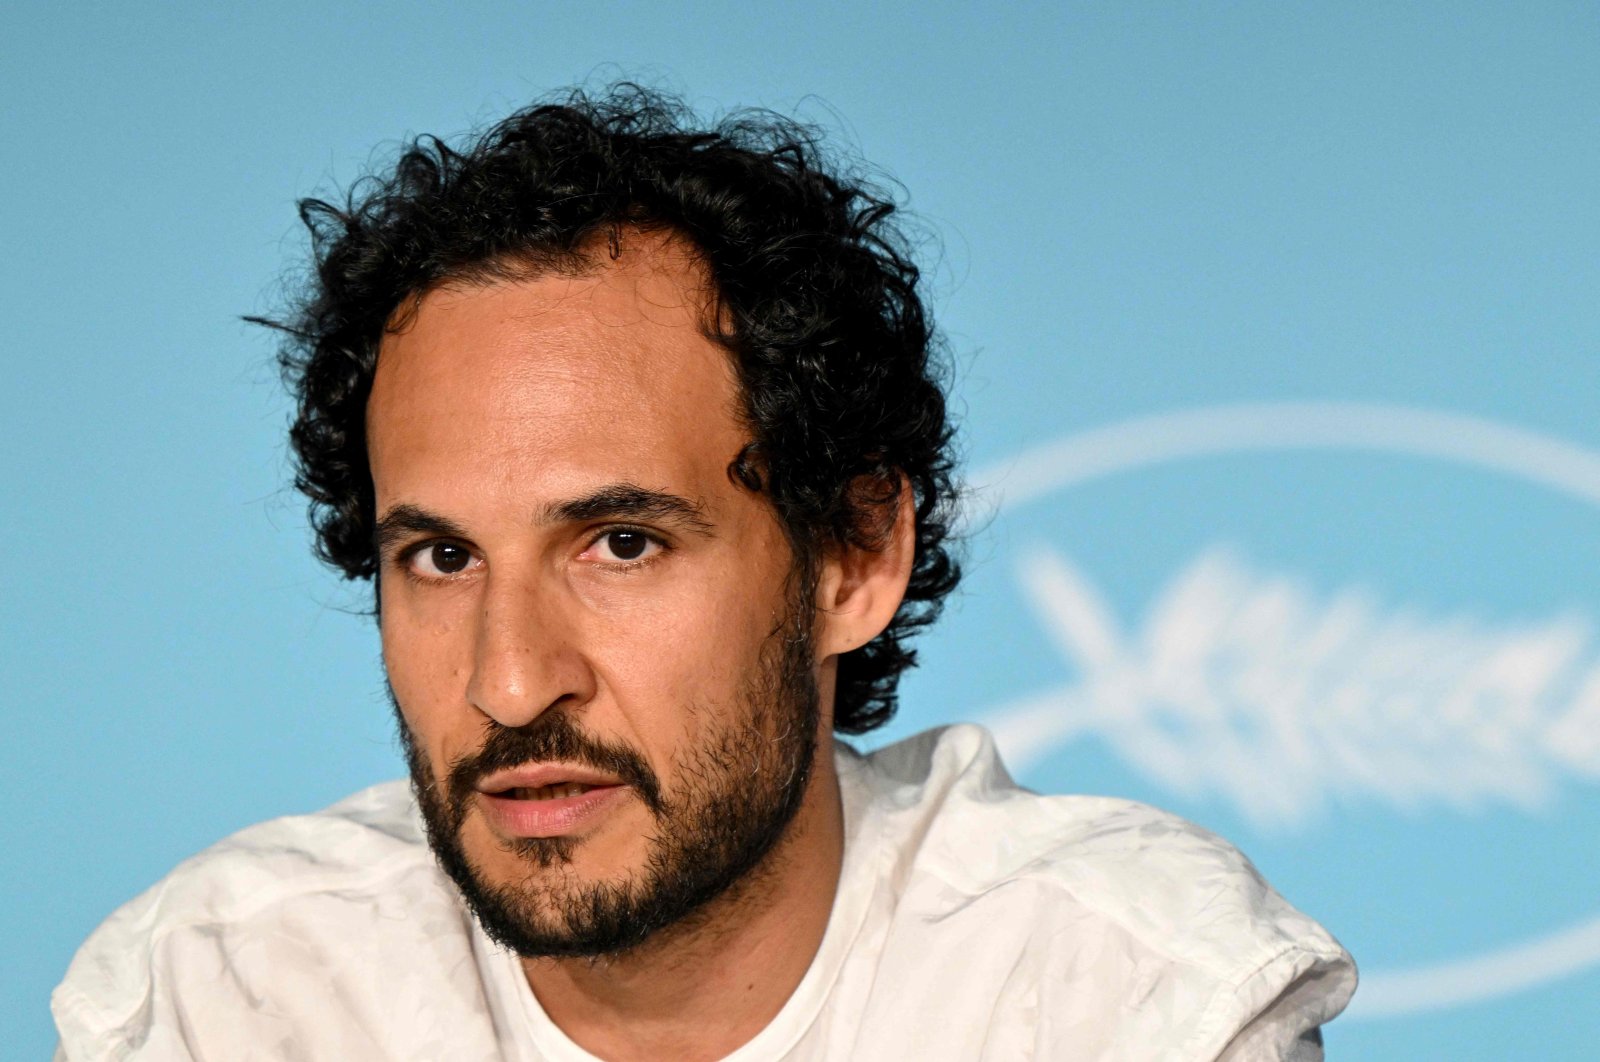 Iranian-Danish director Ali Abbasi speaks during a press conference for the film "Holy Spider" at the 75th edition of the Cannes Film Festival in Cannes, southern France, May 23, 2022. (AFP Photo)